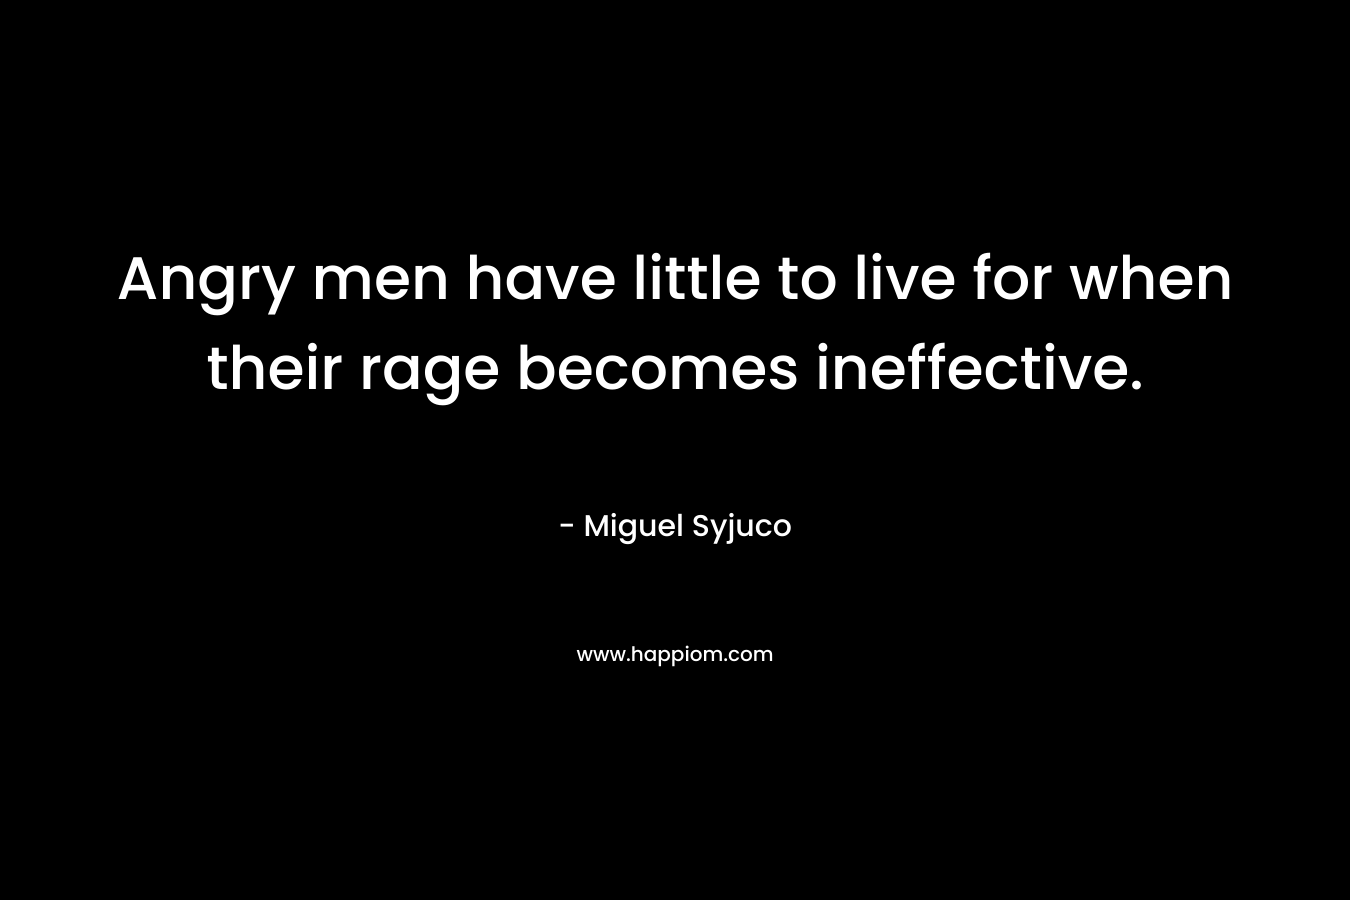 Angry men have little to live for when their rage becomes ineffective.